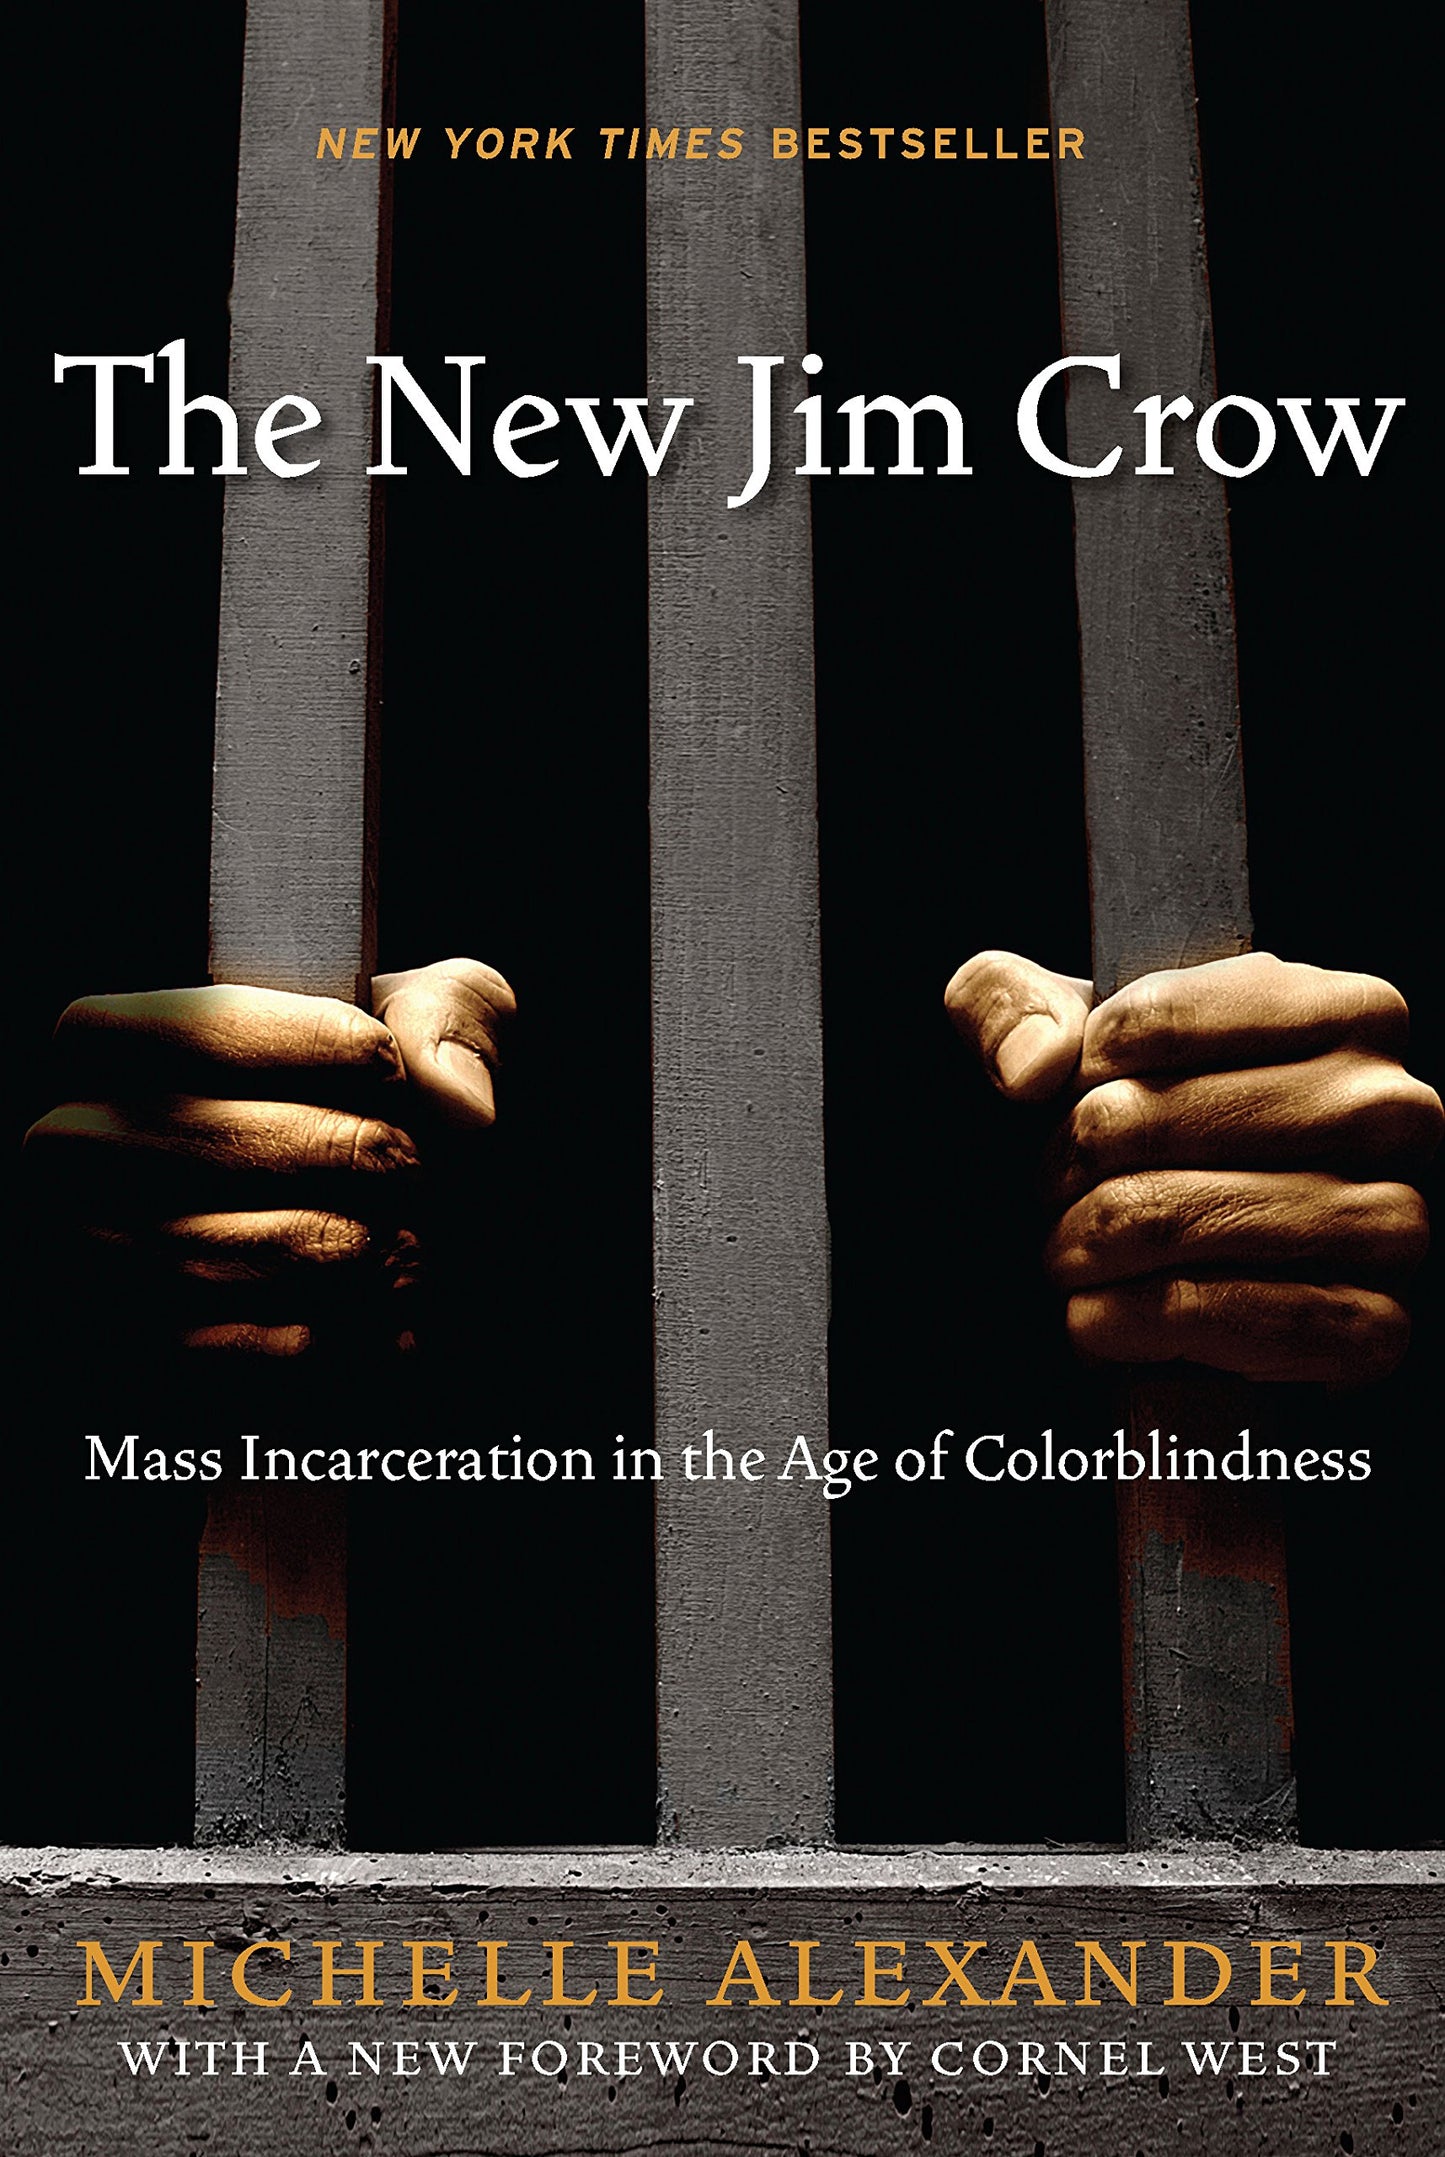 The New Jim Crow // Mass Incarceration in the Age of Colorblindness